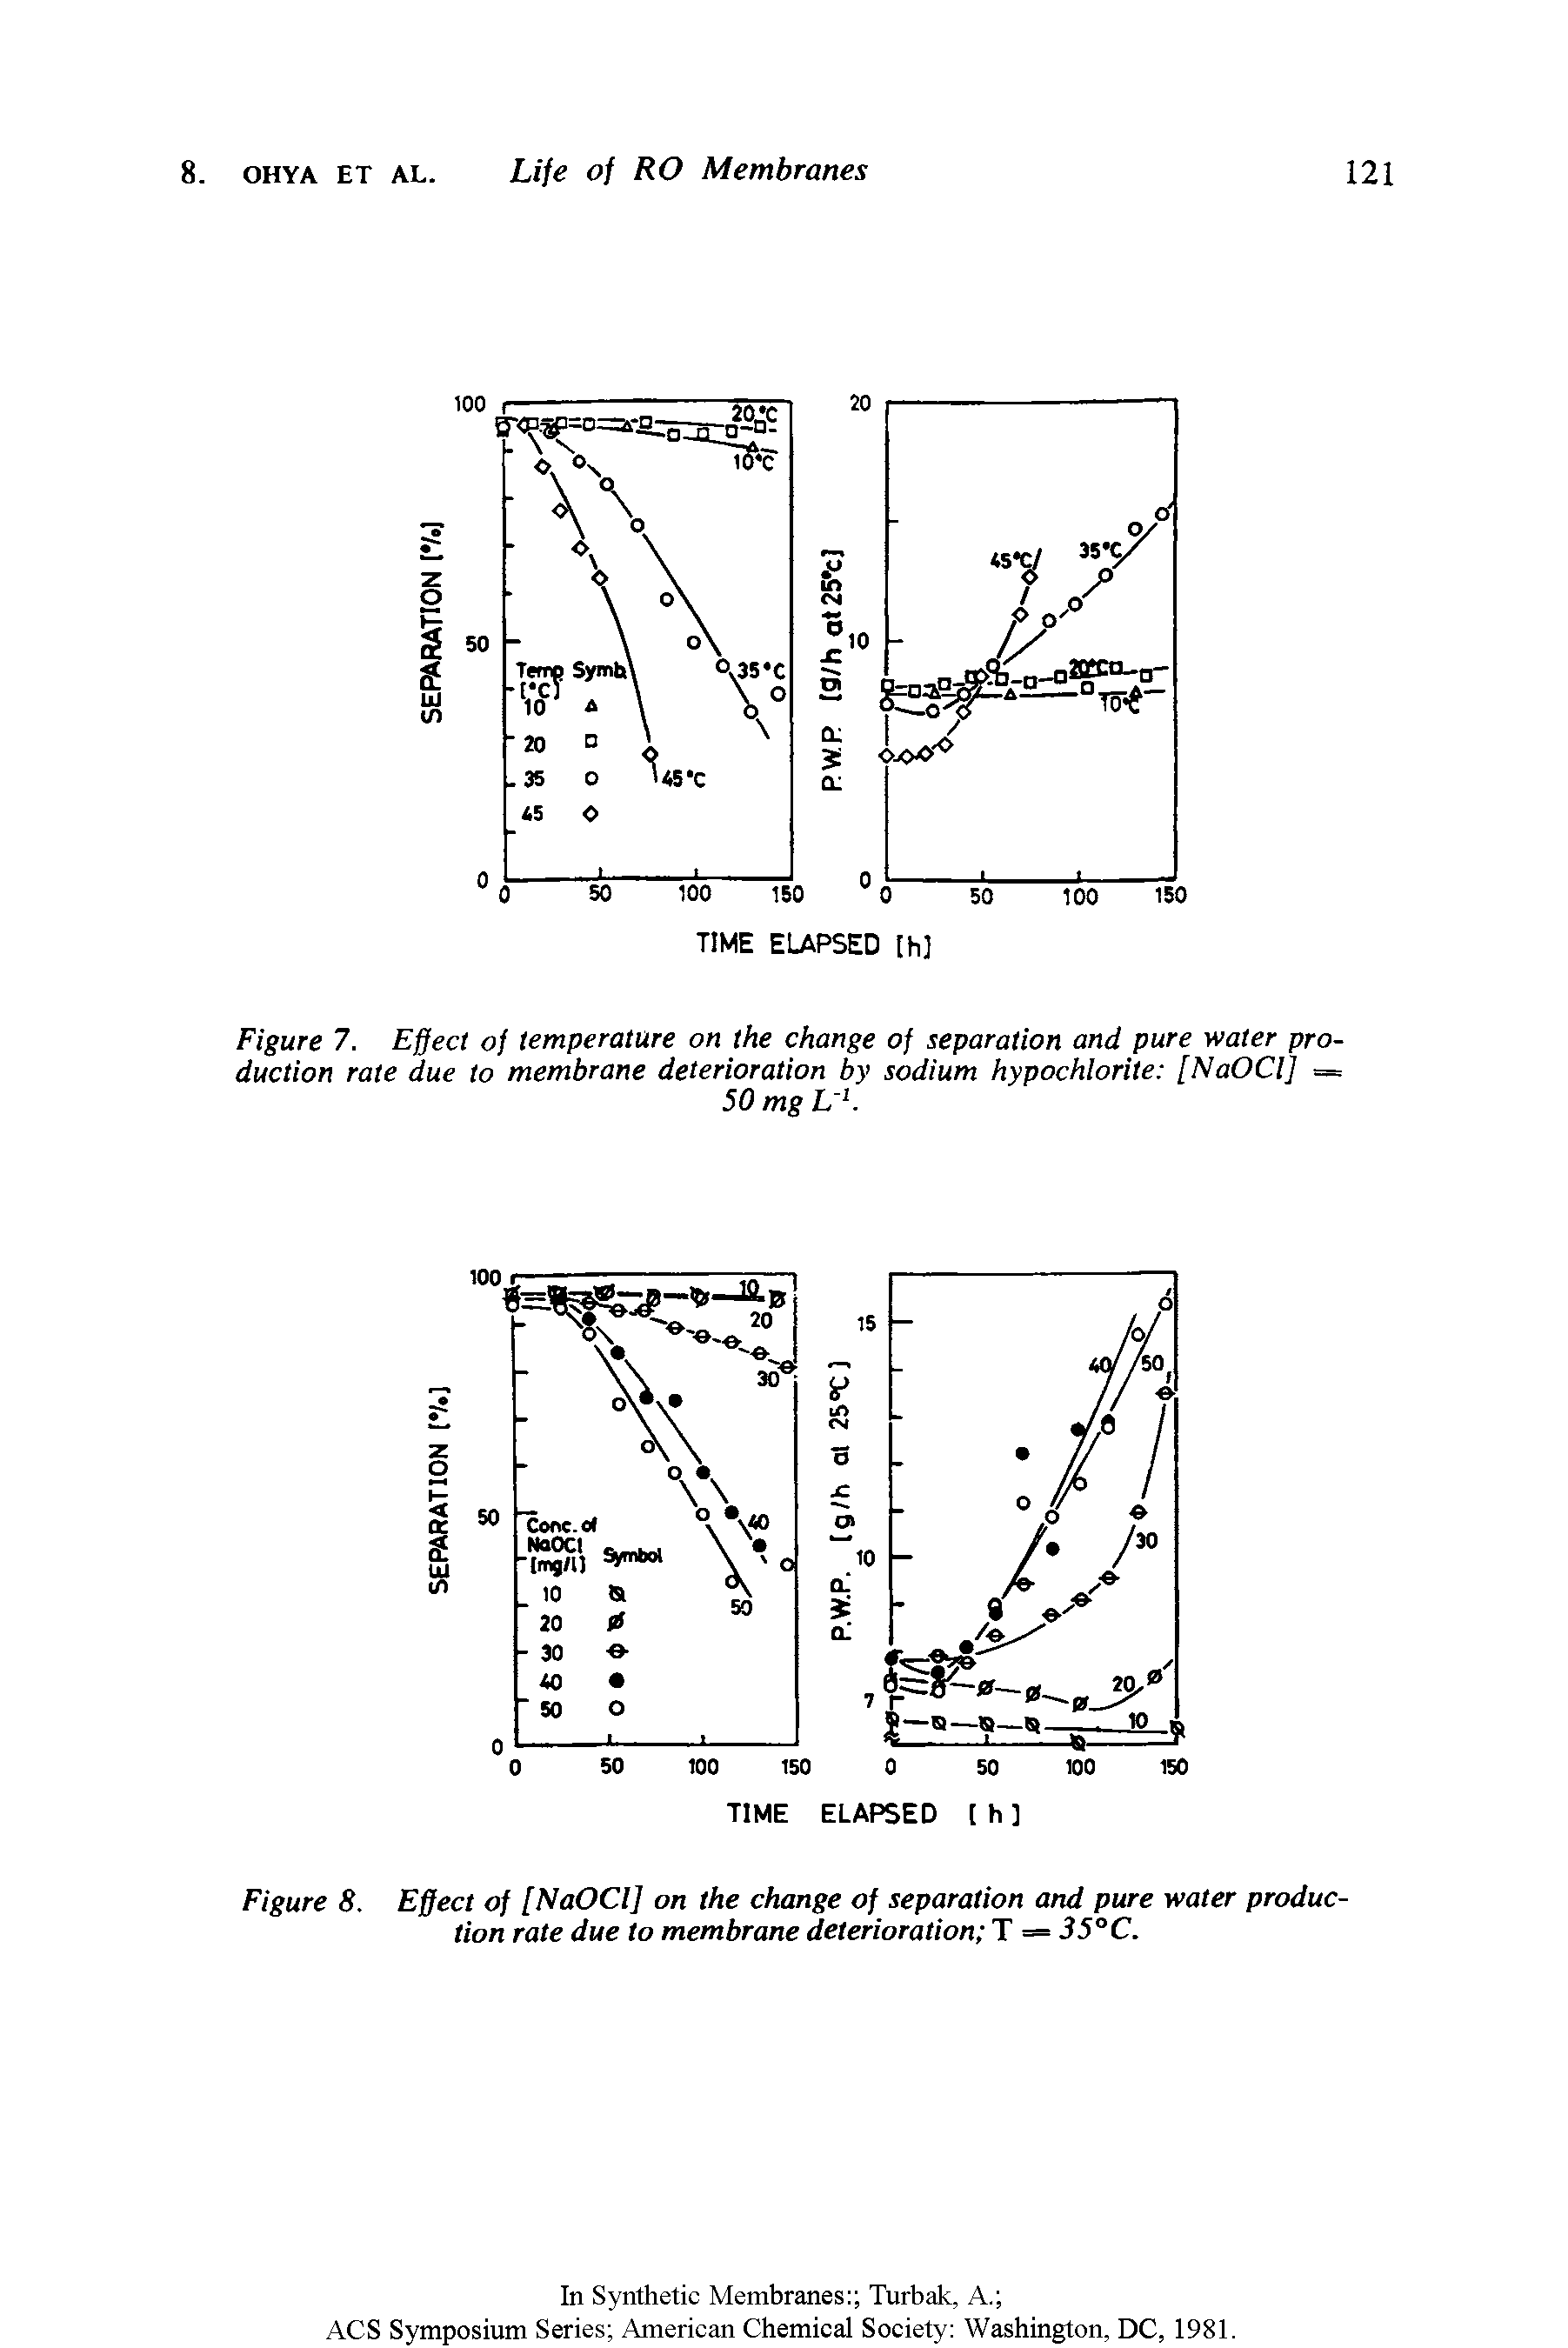 Figure 7. E ect of temperature on the change of separation and pure water production rate due to membrane deterioration by sodium hypochlorite [NaOCl] =...